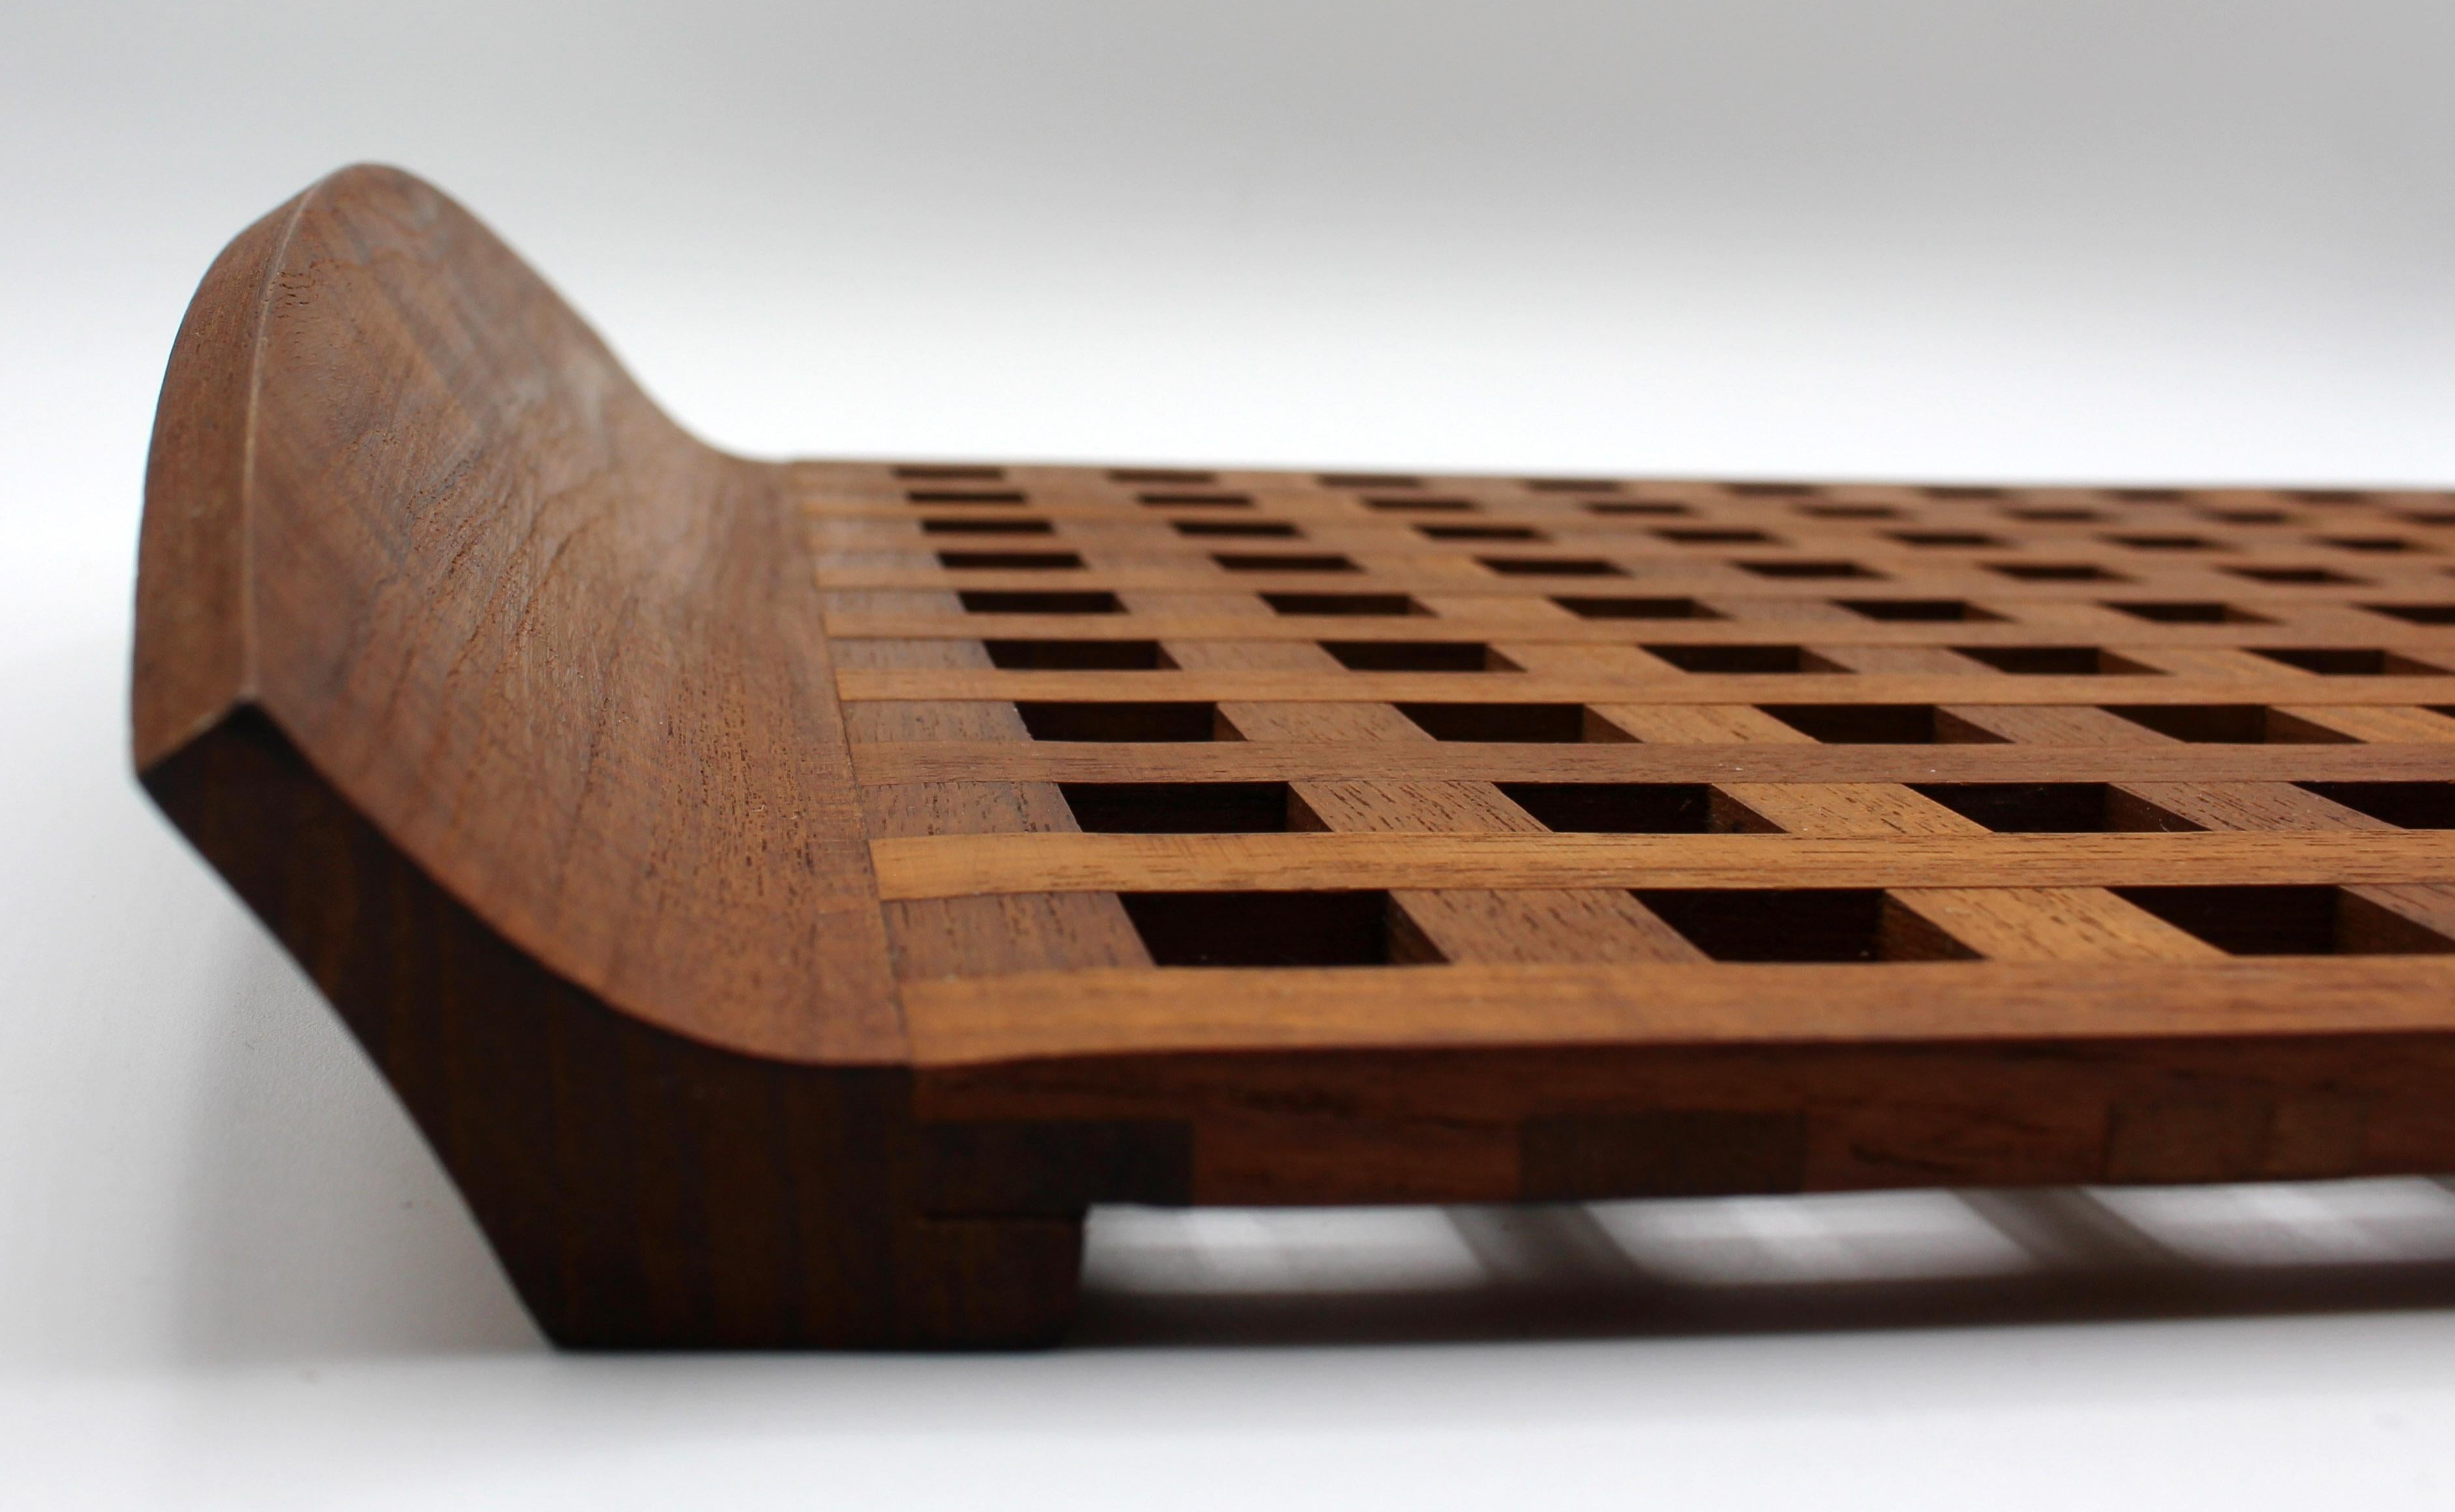 A handsome, large teak lattice work serving tray with outswept sides making secure handles. Integral foot rails. Measures: 18 1/2